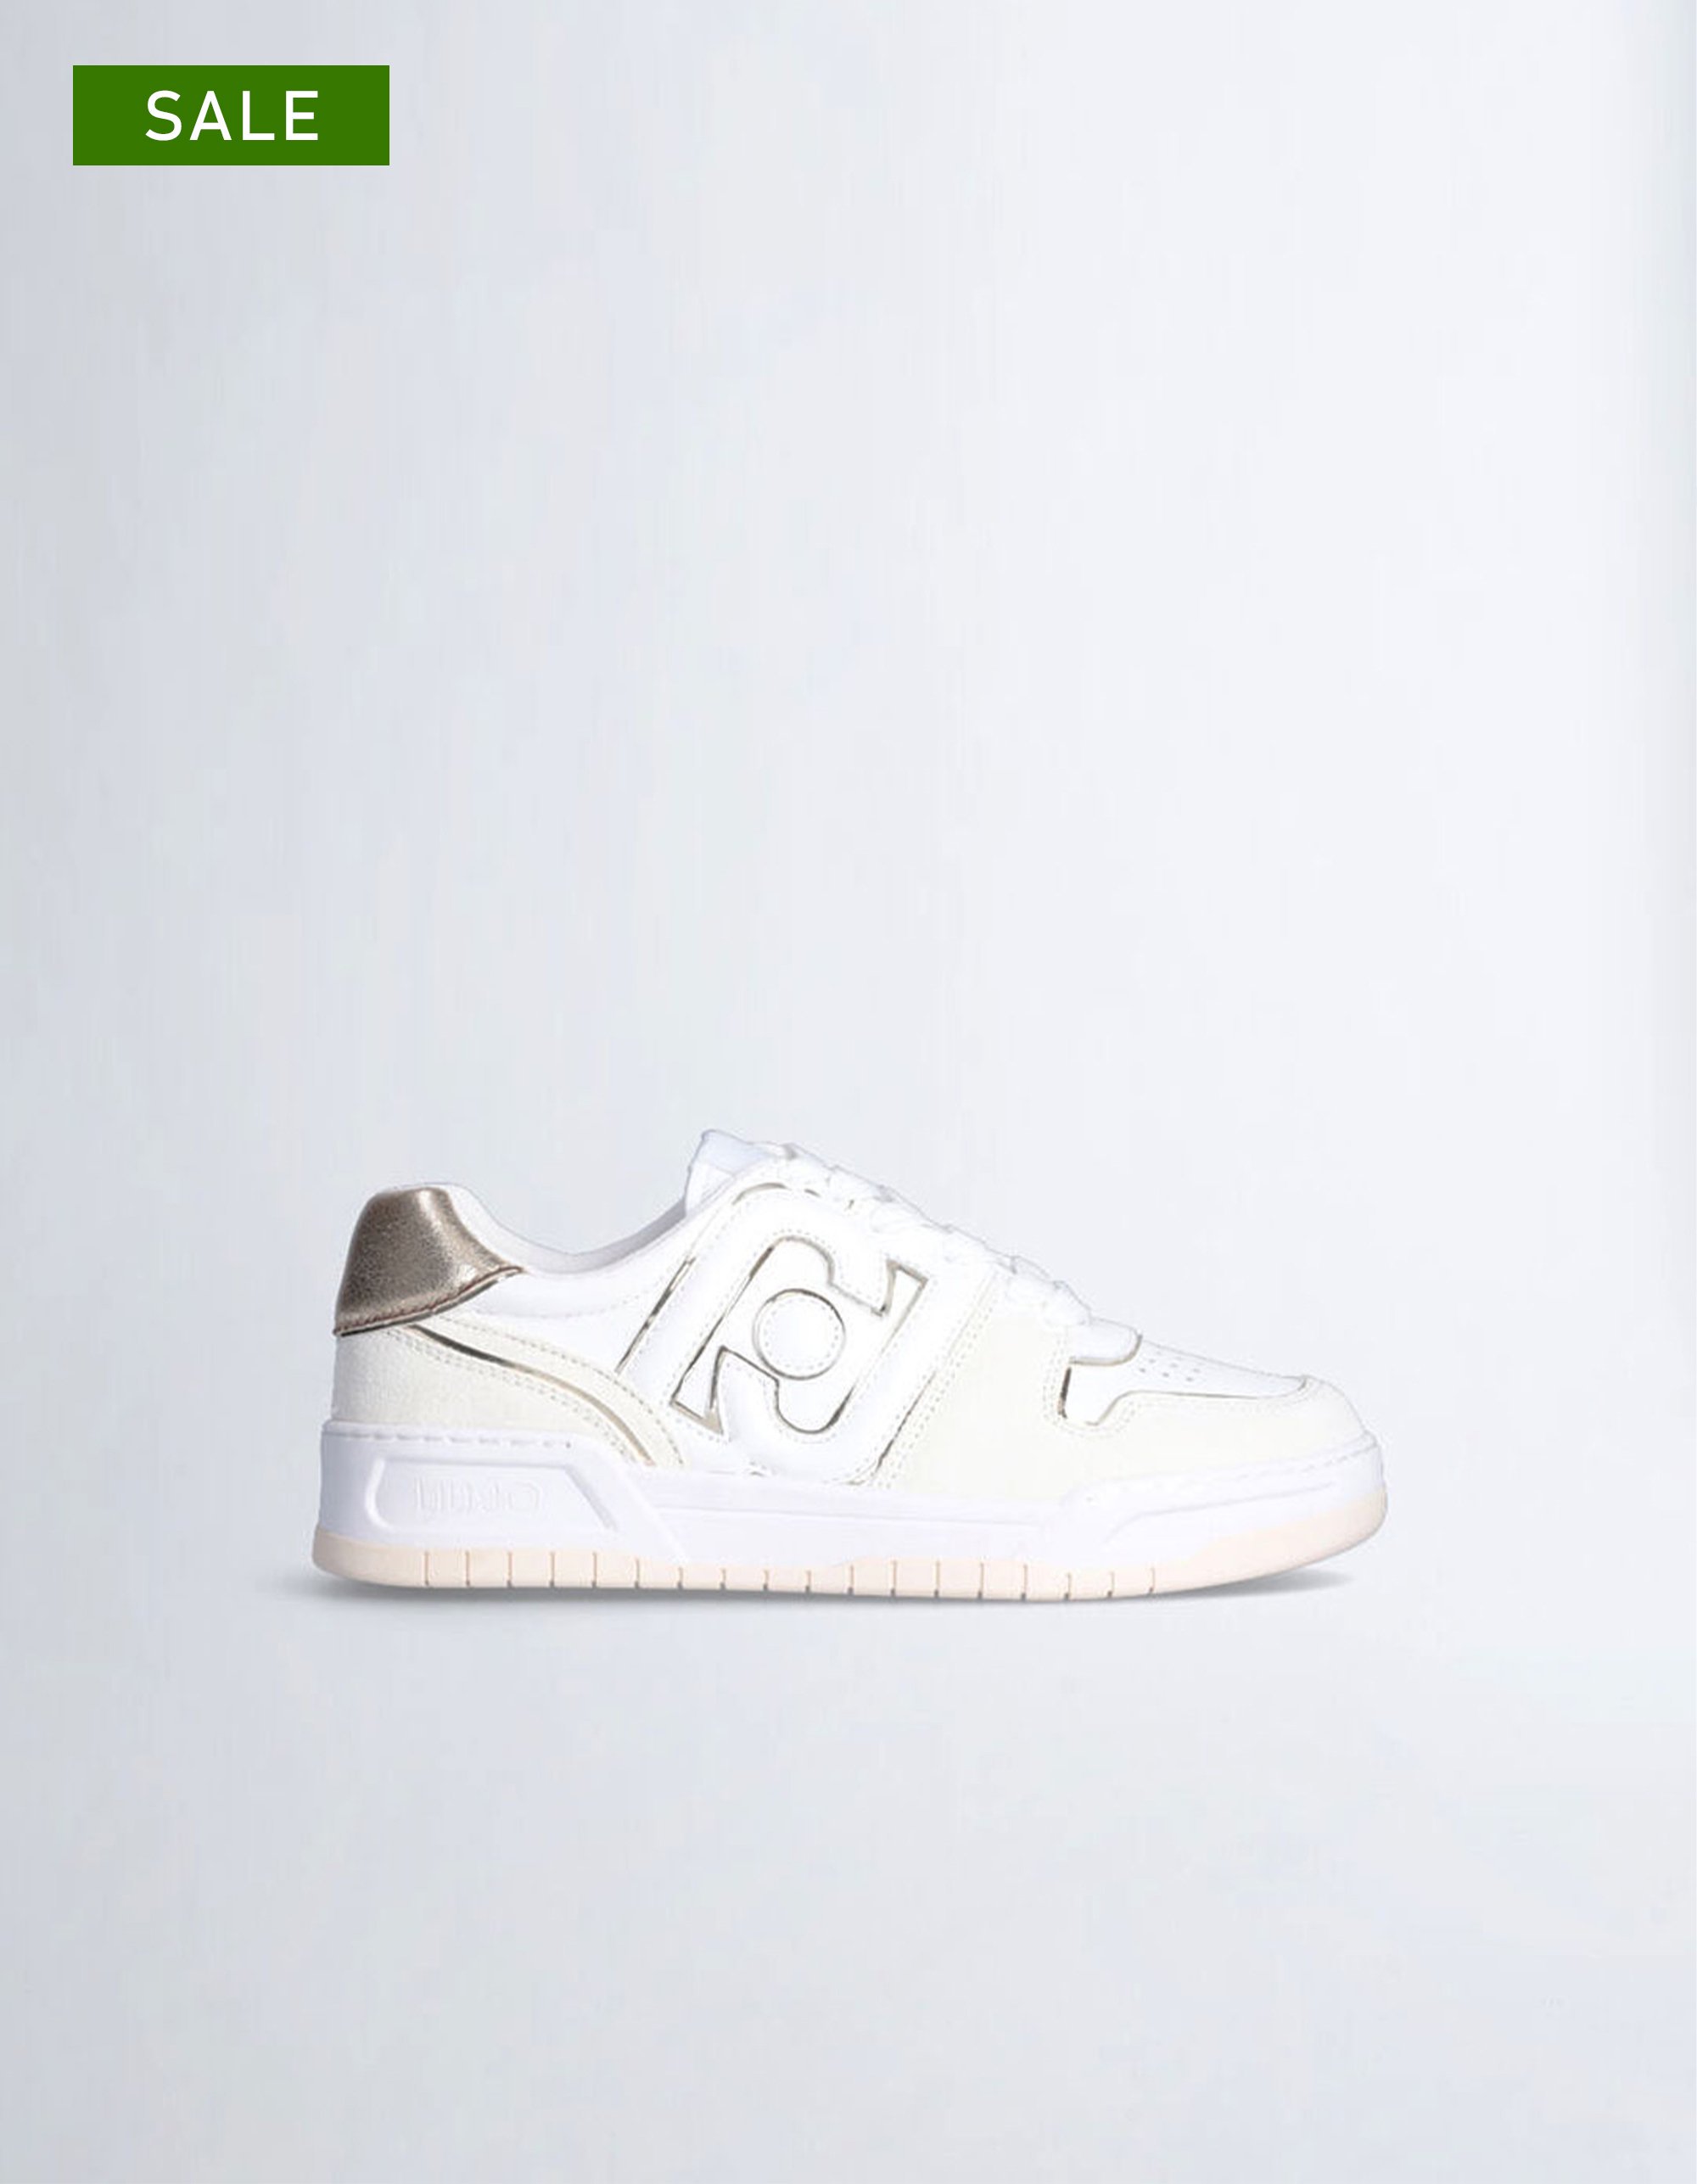 <img class='new_mark_img1' src='https://img.shop-pro.jp/img/new/icons8.gif' style='border:none;display:inline;margin:0px;padding:0px;width:auto;' />【LIU・JO】Leather basketball sneakers 23ss